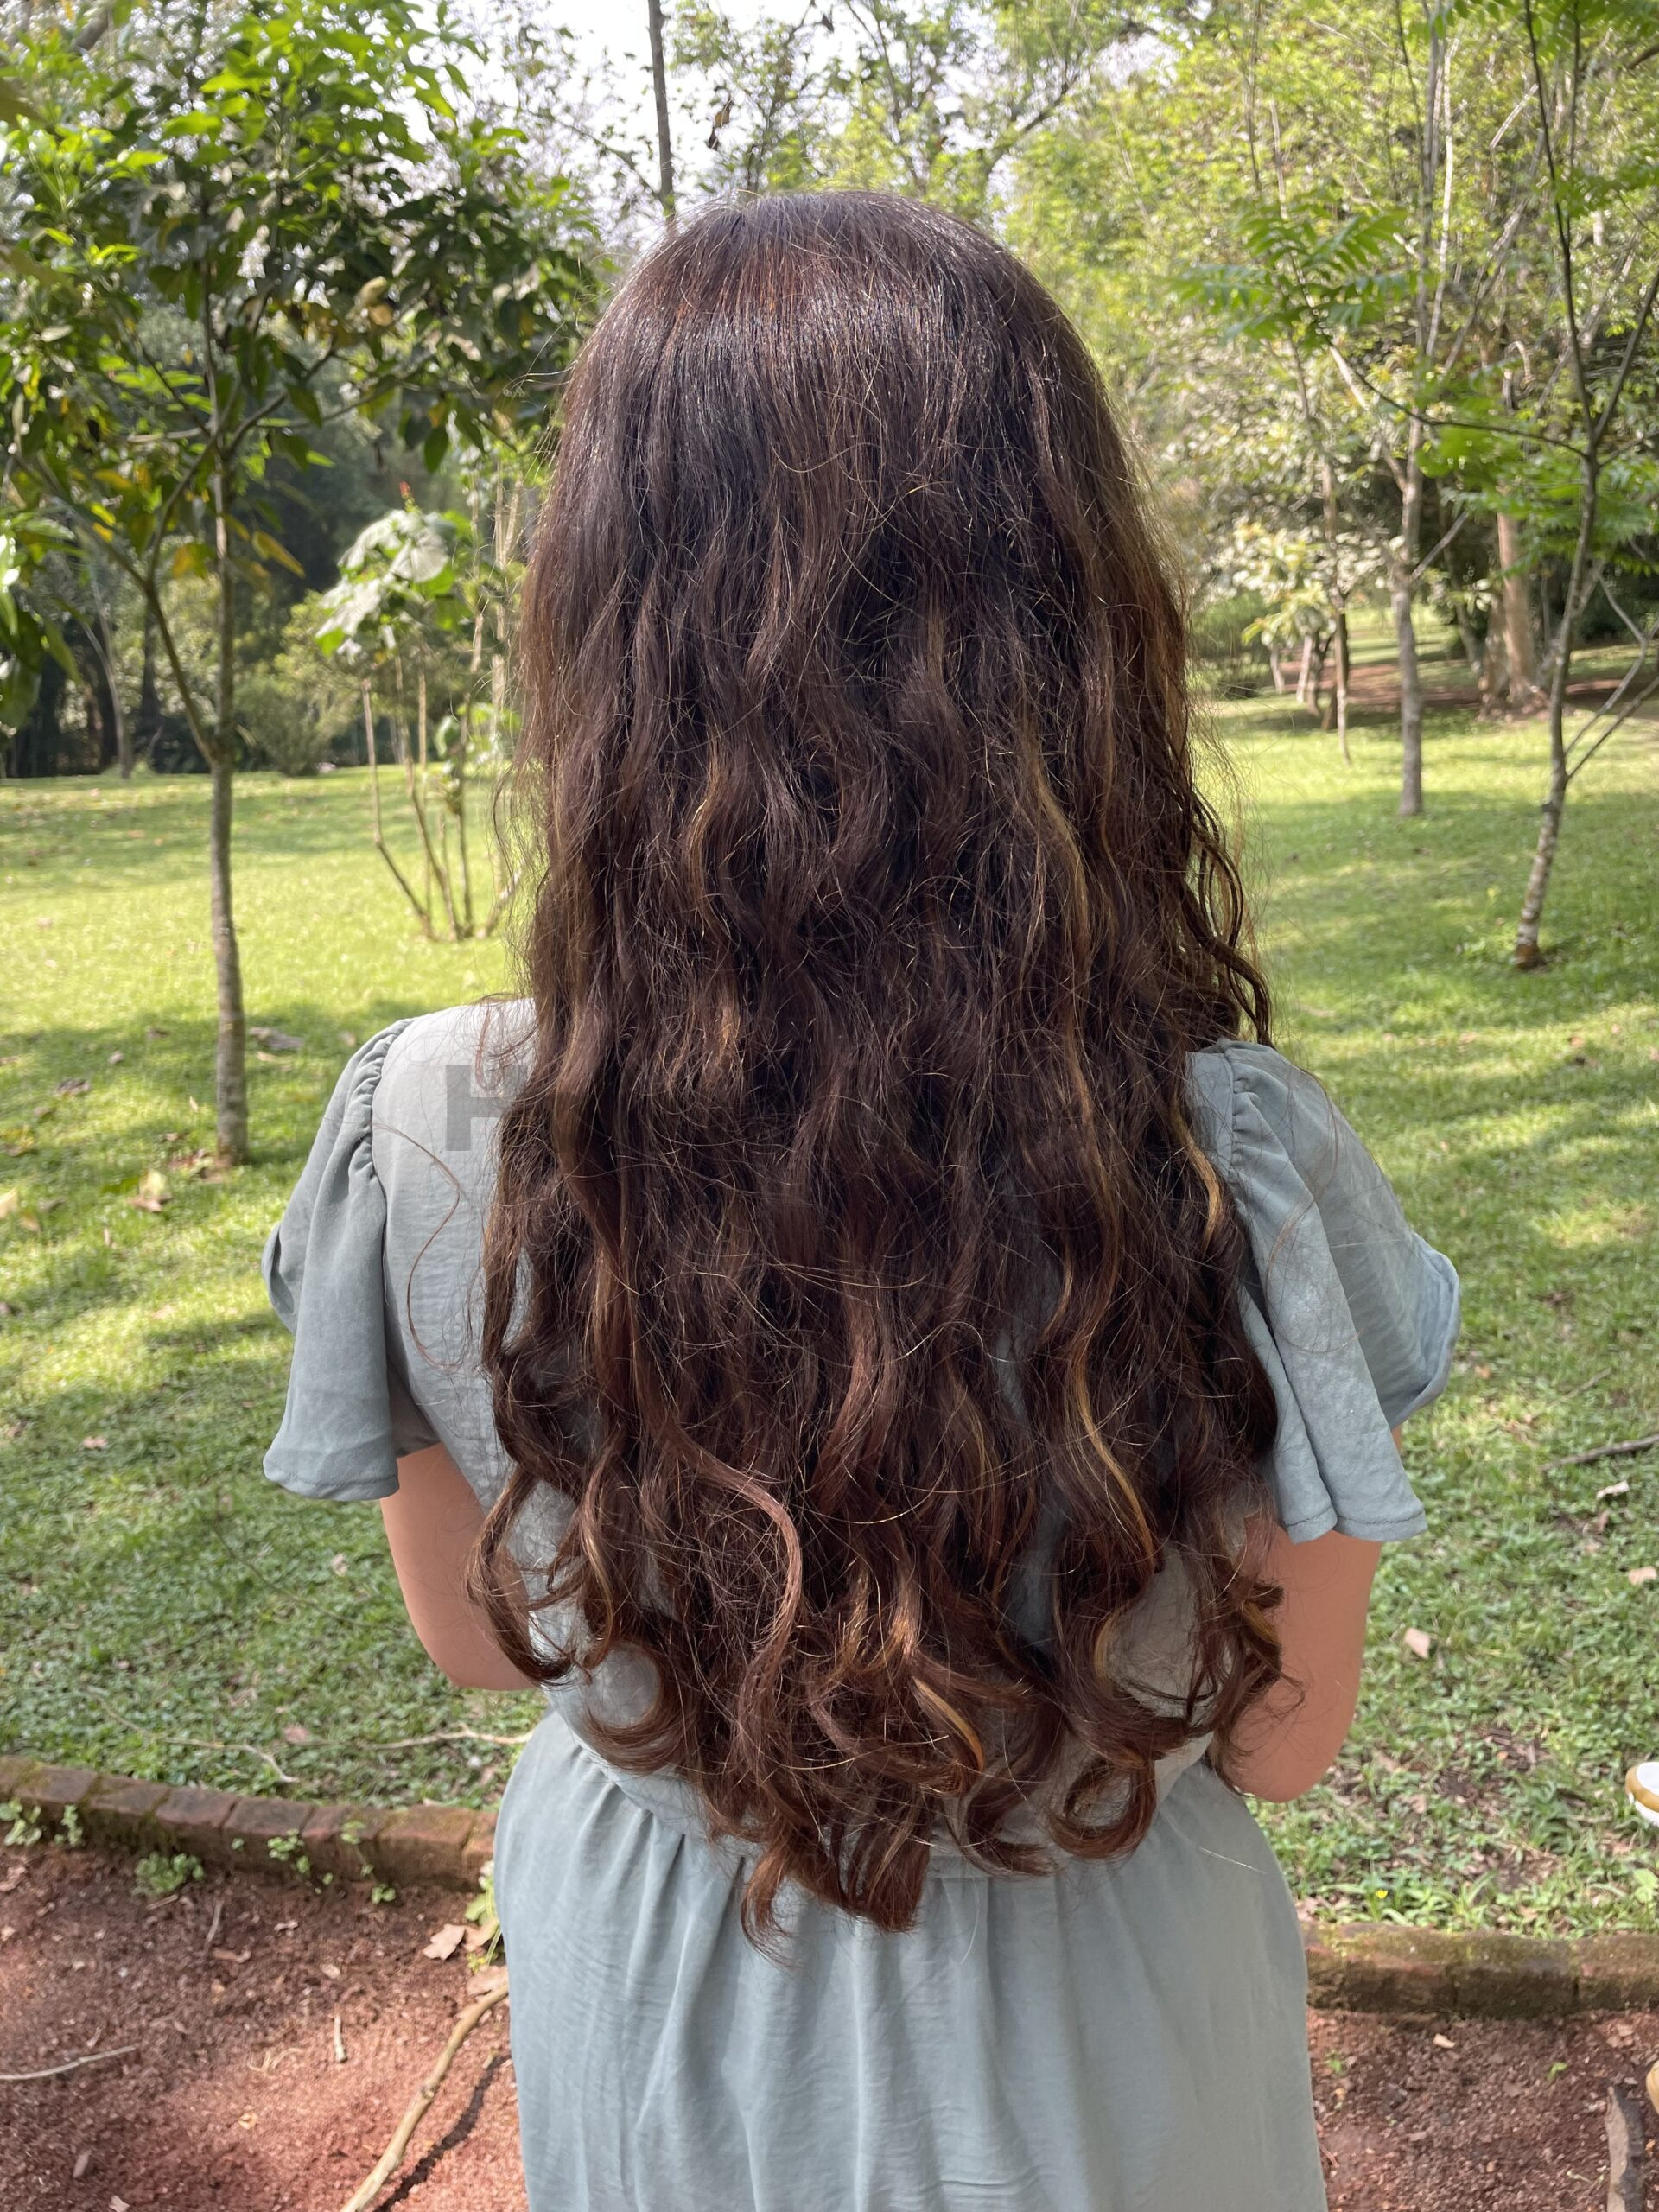 13 inch long, curly dark brown hair with a few highlights - HairSellon